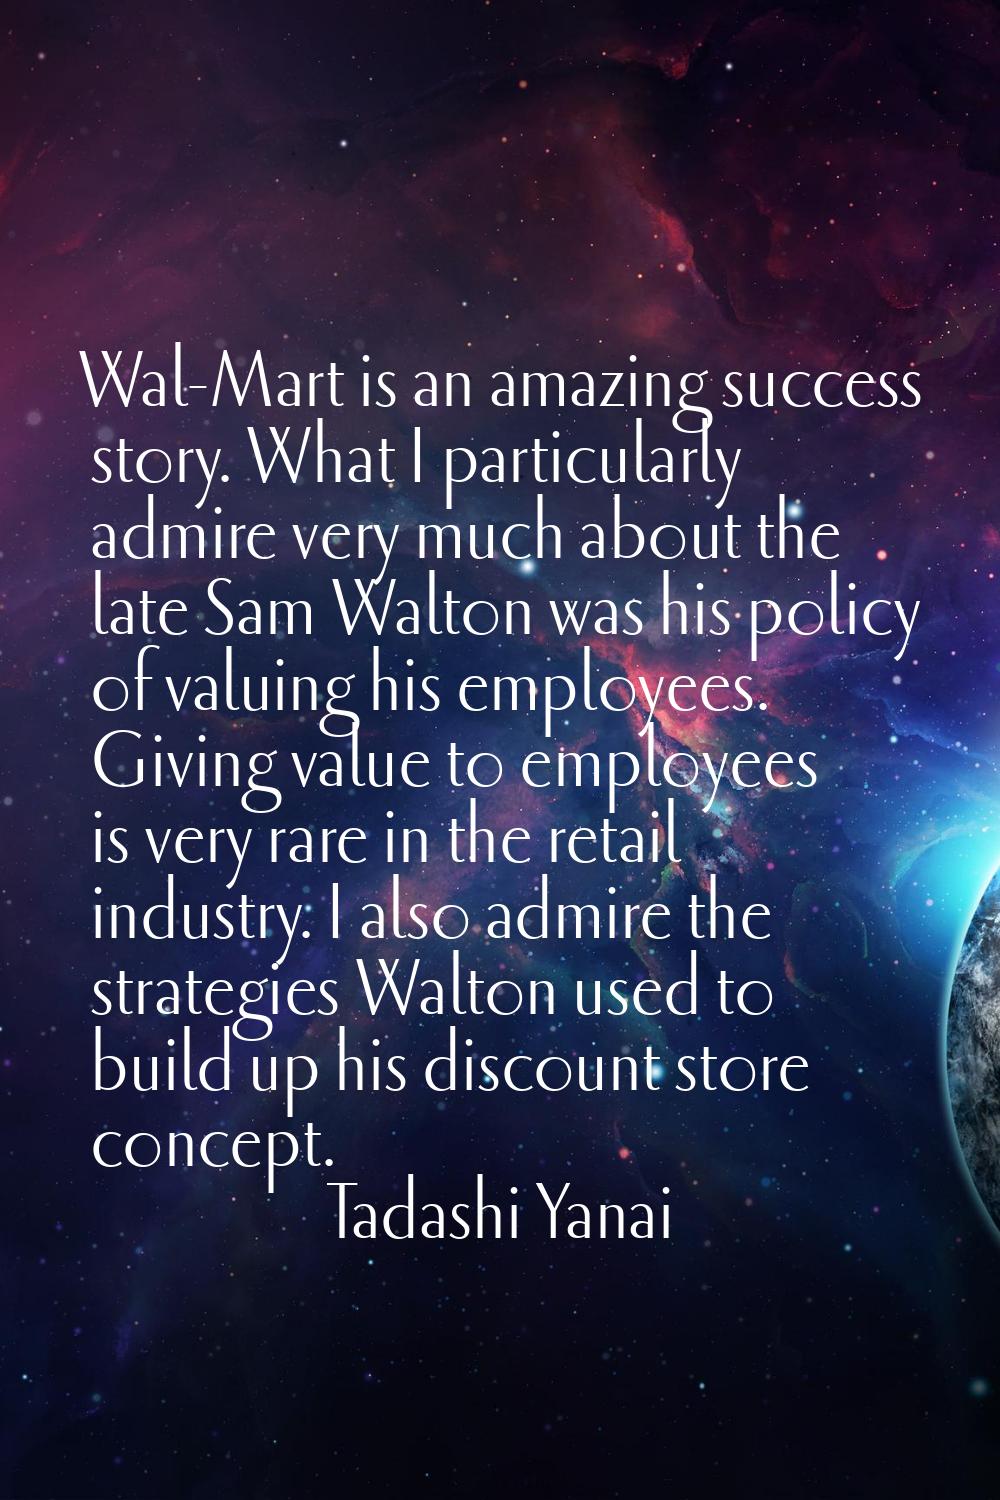 Wal-Mart is an amazing success story. What I particularly admire very much about the late Sam Walto